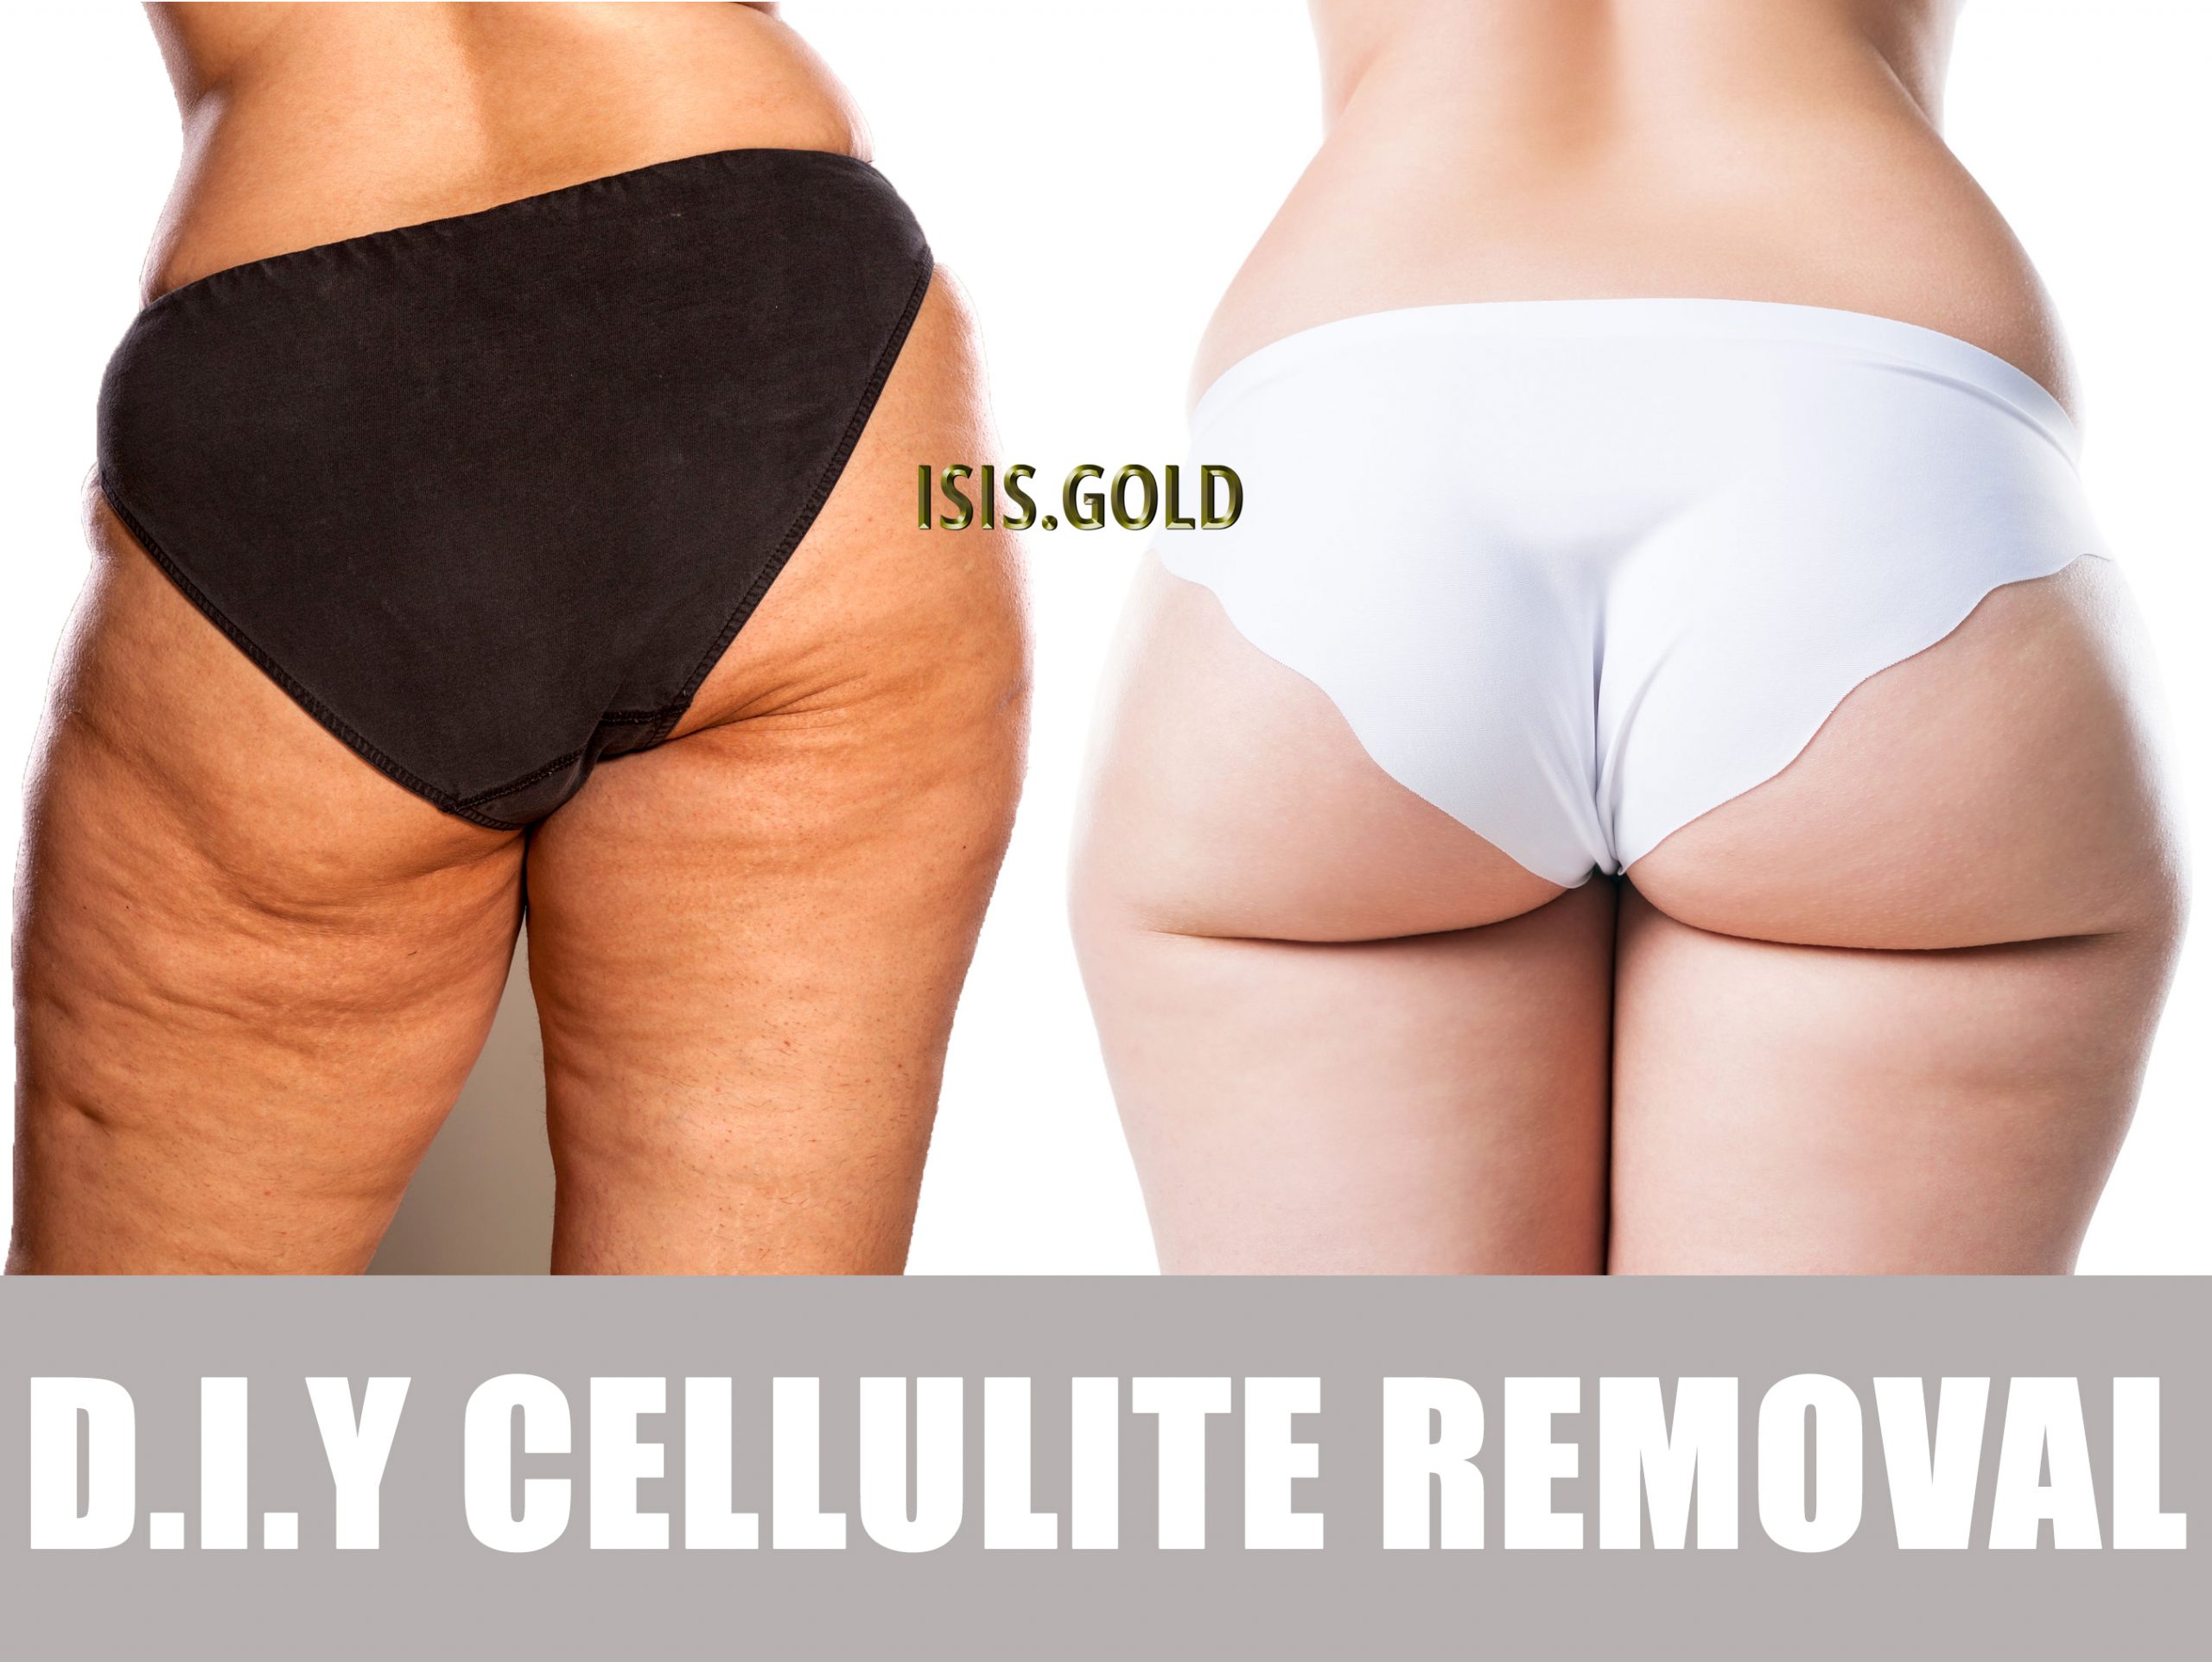 cellulite removalbefore and after, cellulite removal, cellulite treatment, best cellulite treatment, cellulite reduction, cellulite on legs,get rid of cellulite, goodbye cellulite, cellulite creams, anti cellulite,severe cellulite, cellulite on thighs, cellulite treatment near me